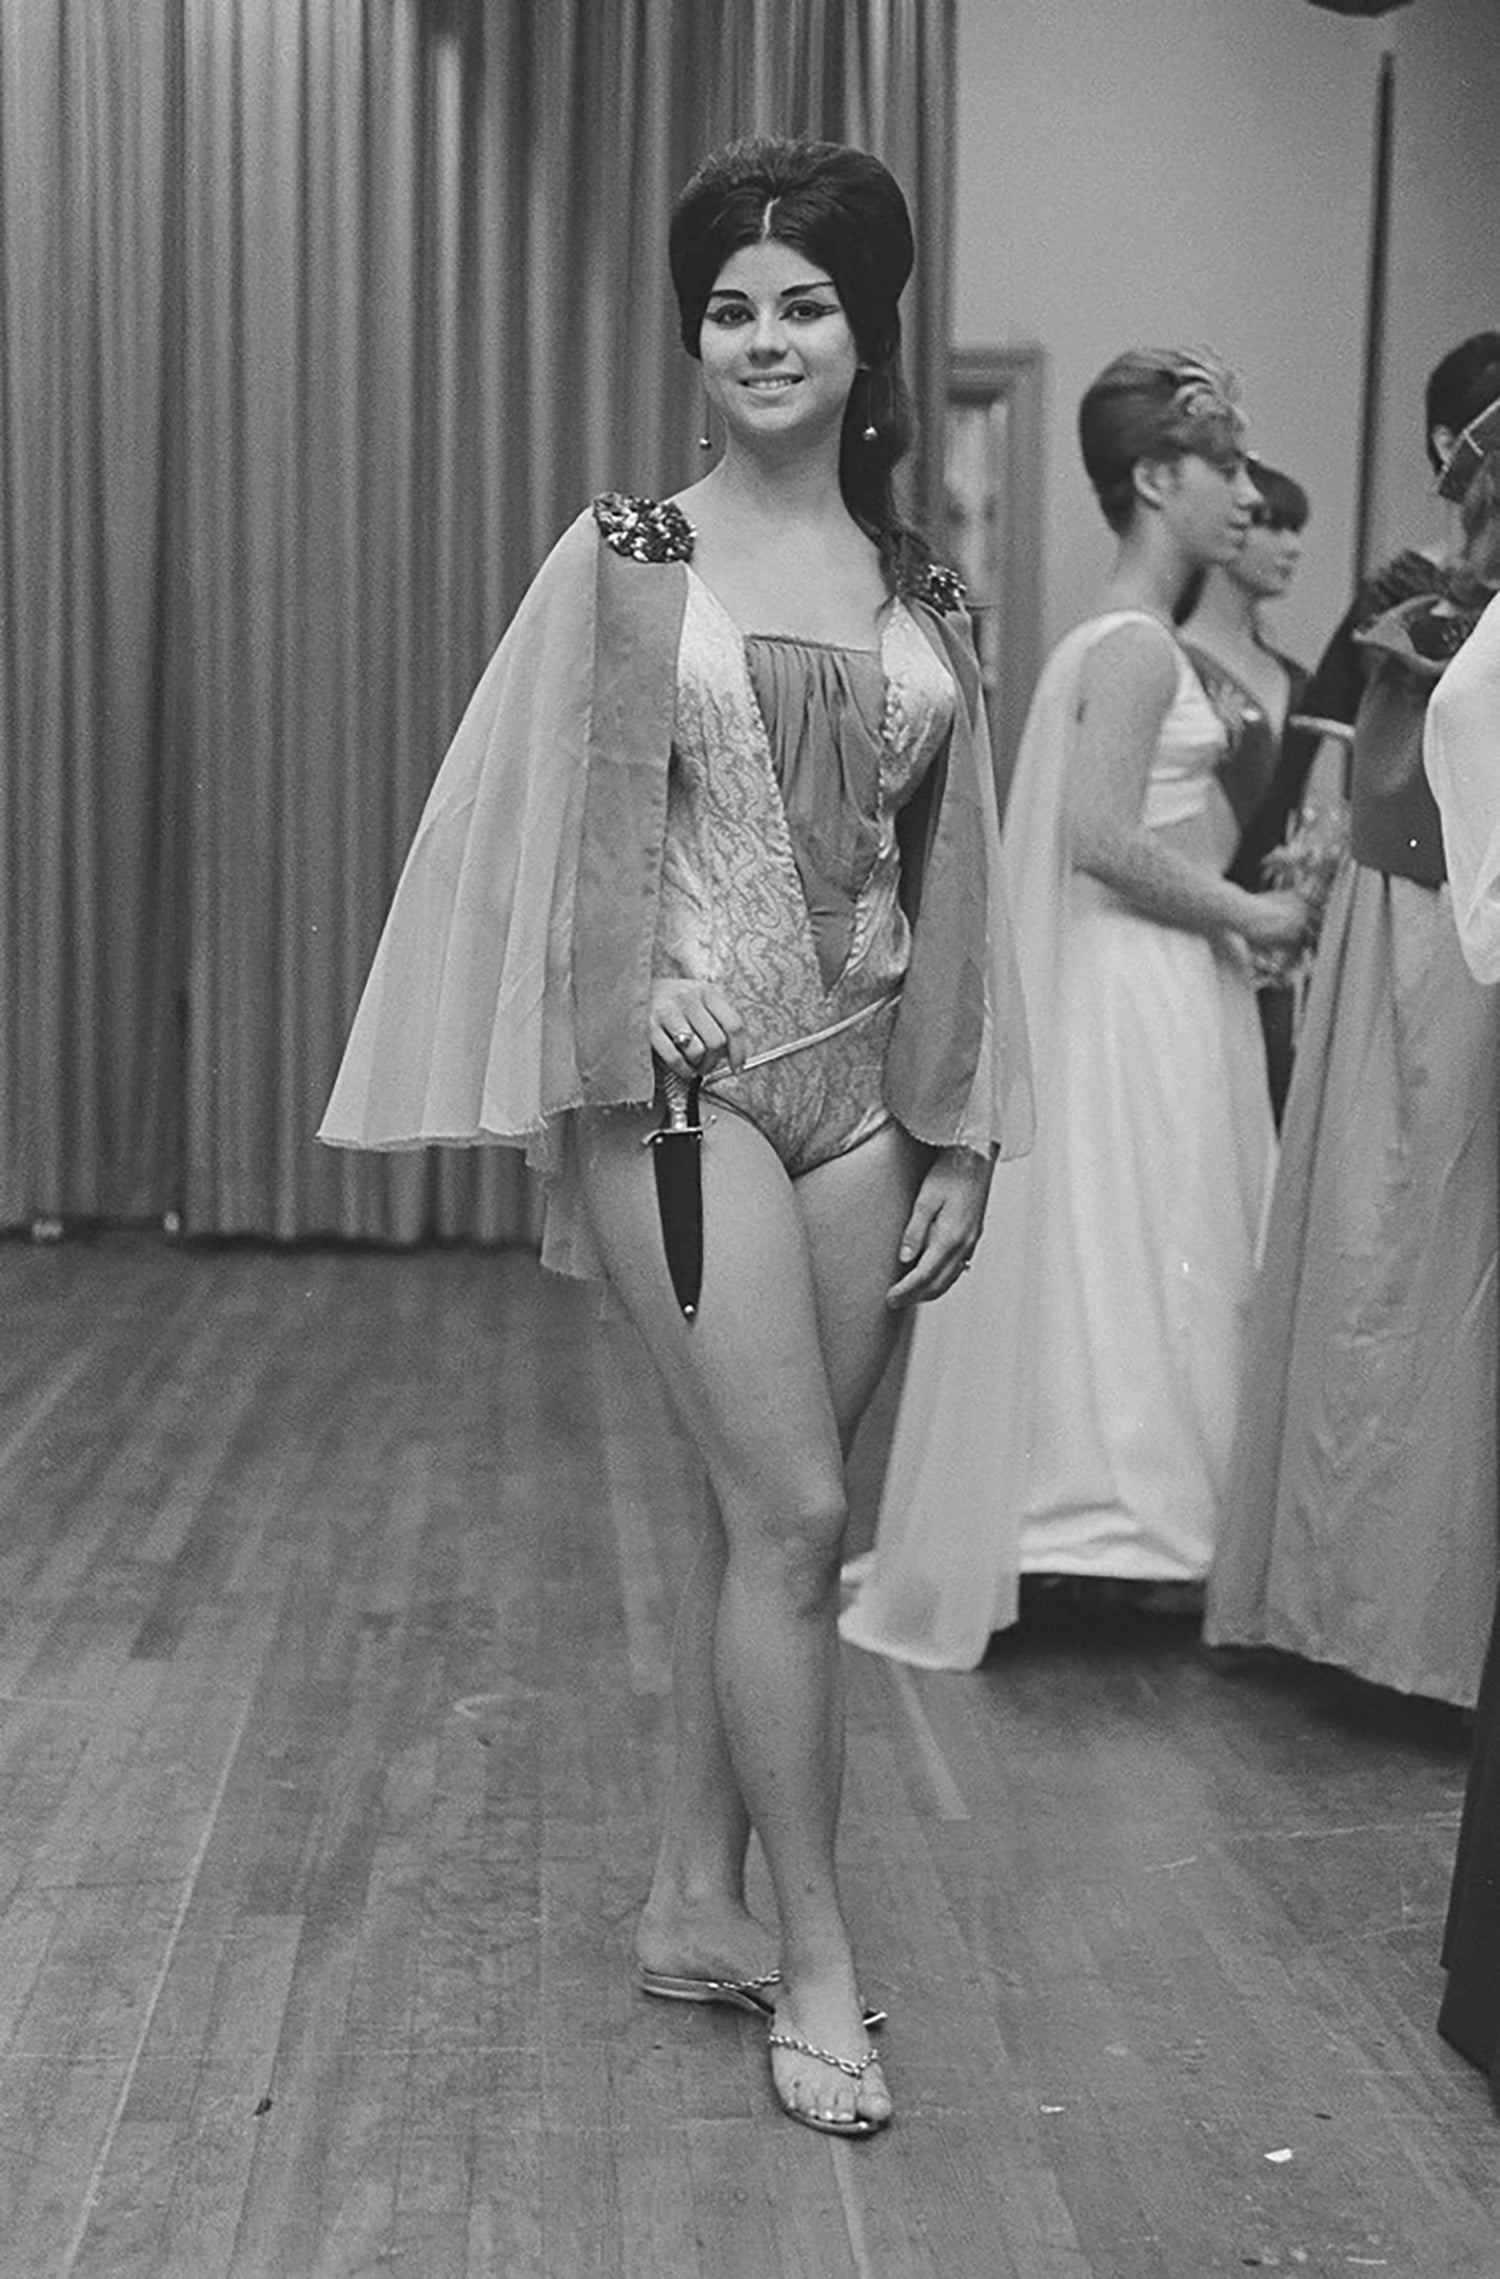 Photos from the 1966 World Science Fiction Convention, Photographed by Jay Kay Klein